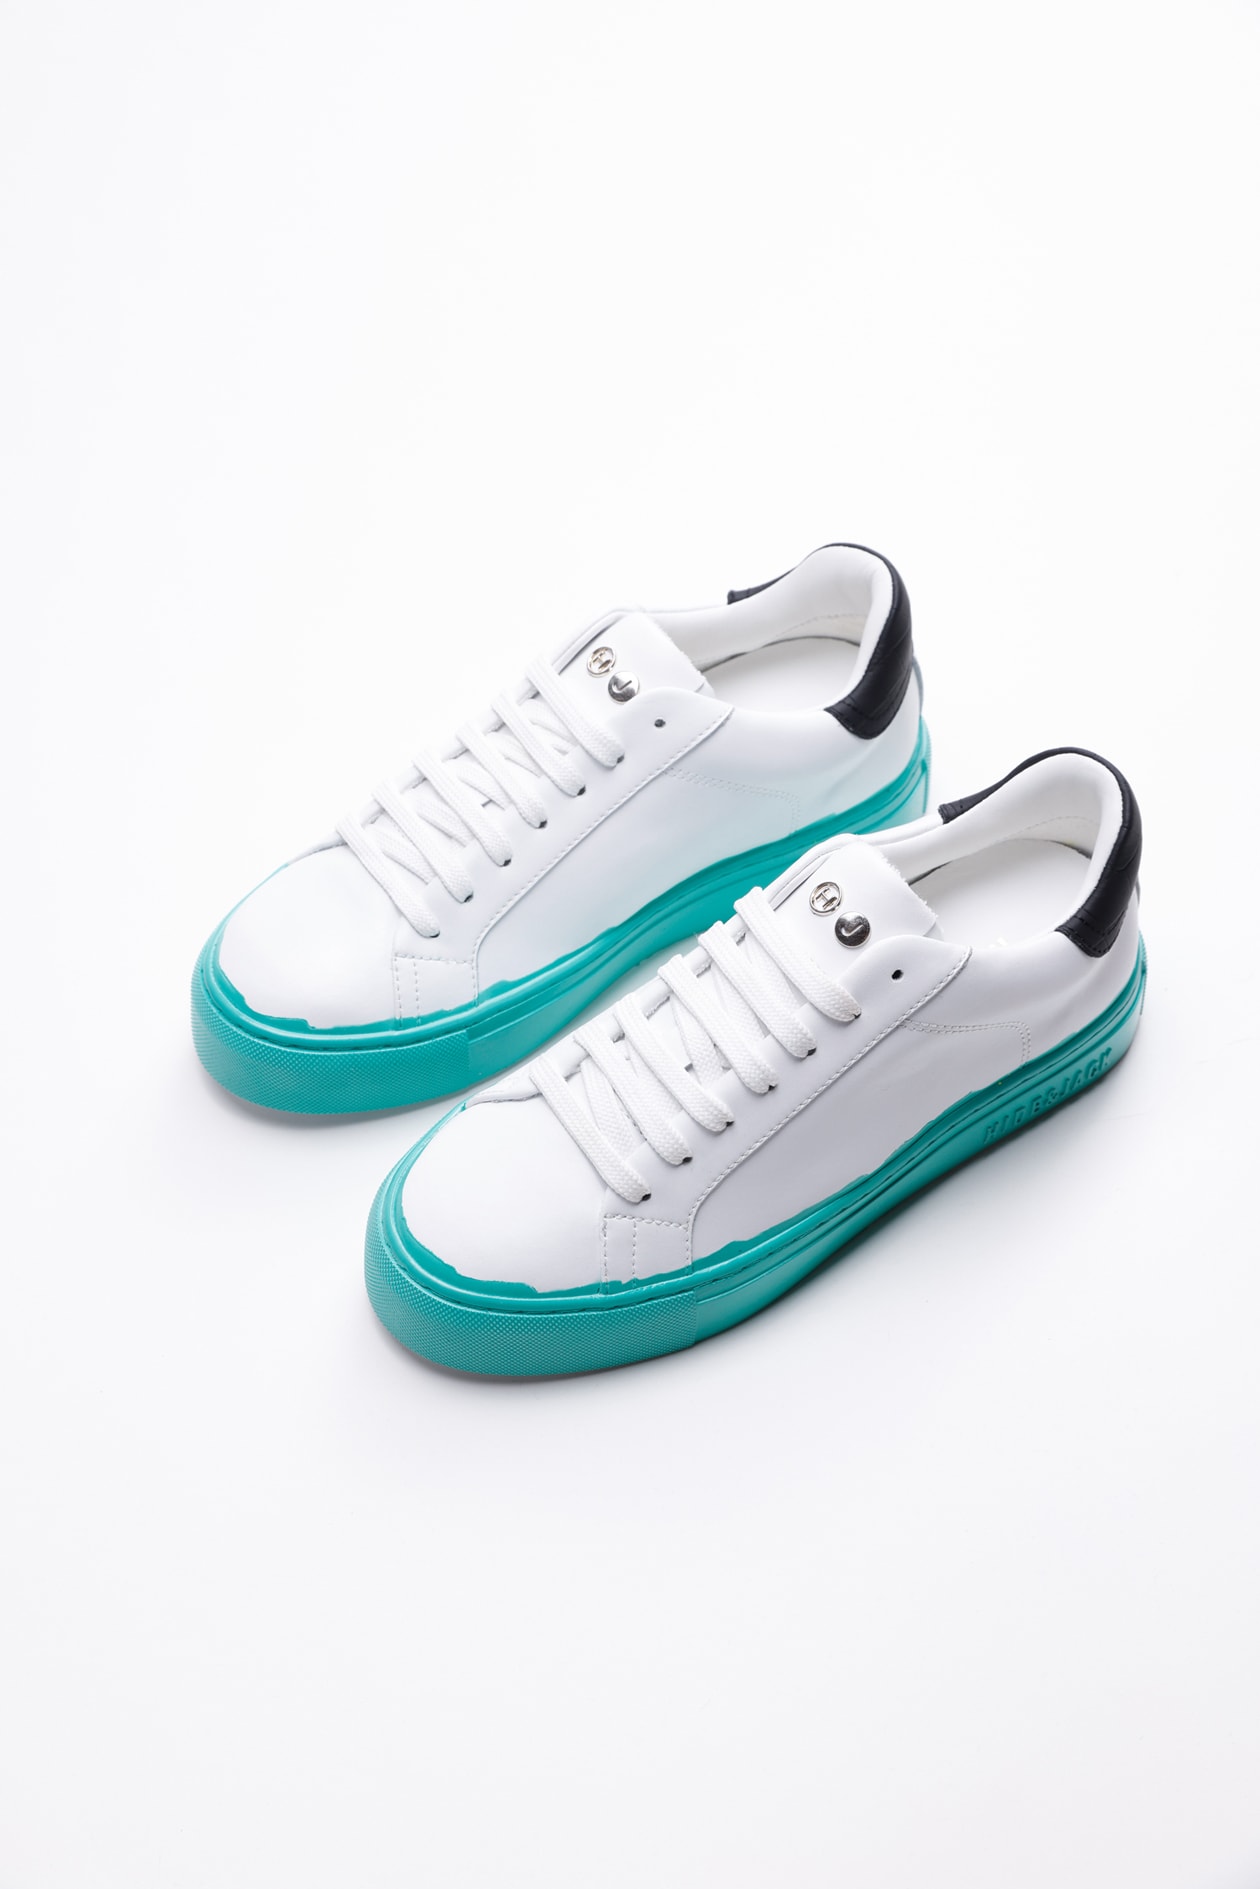 Hide&amp;jack Low Top Trainer - Sky Candy Tiffany In White